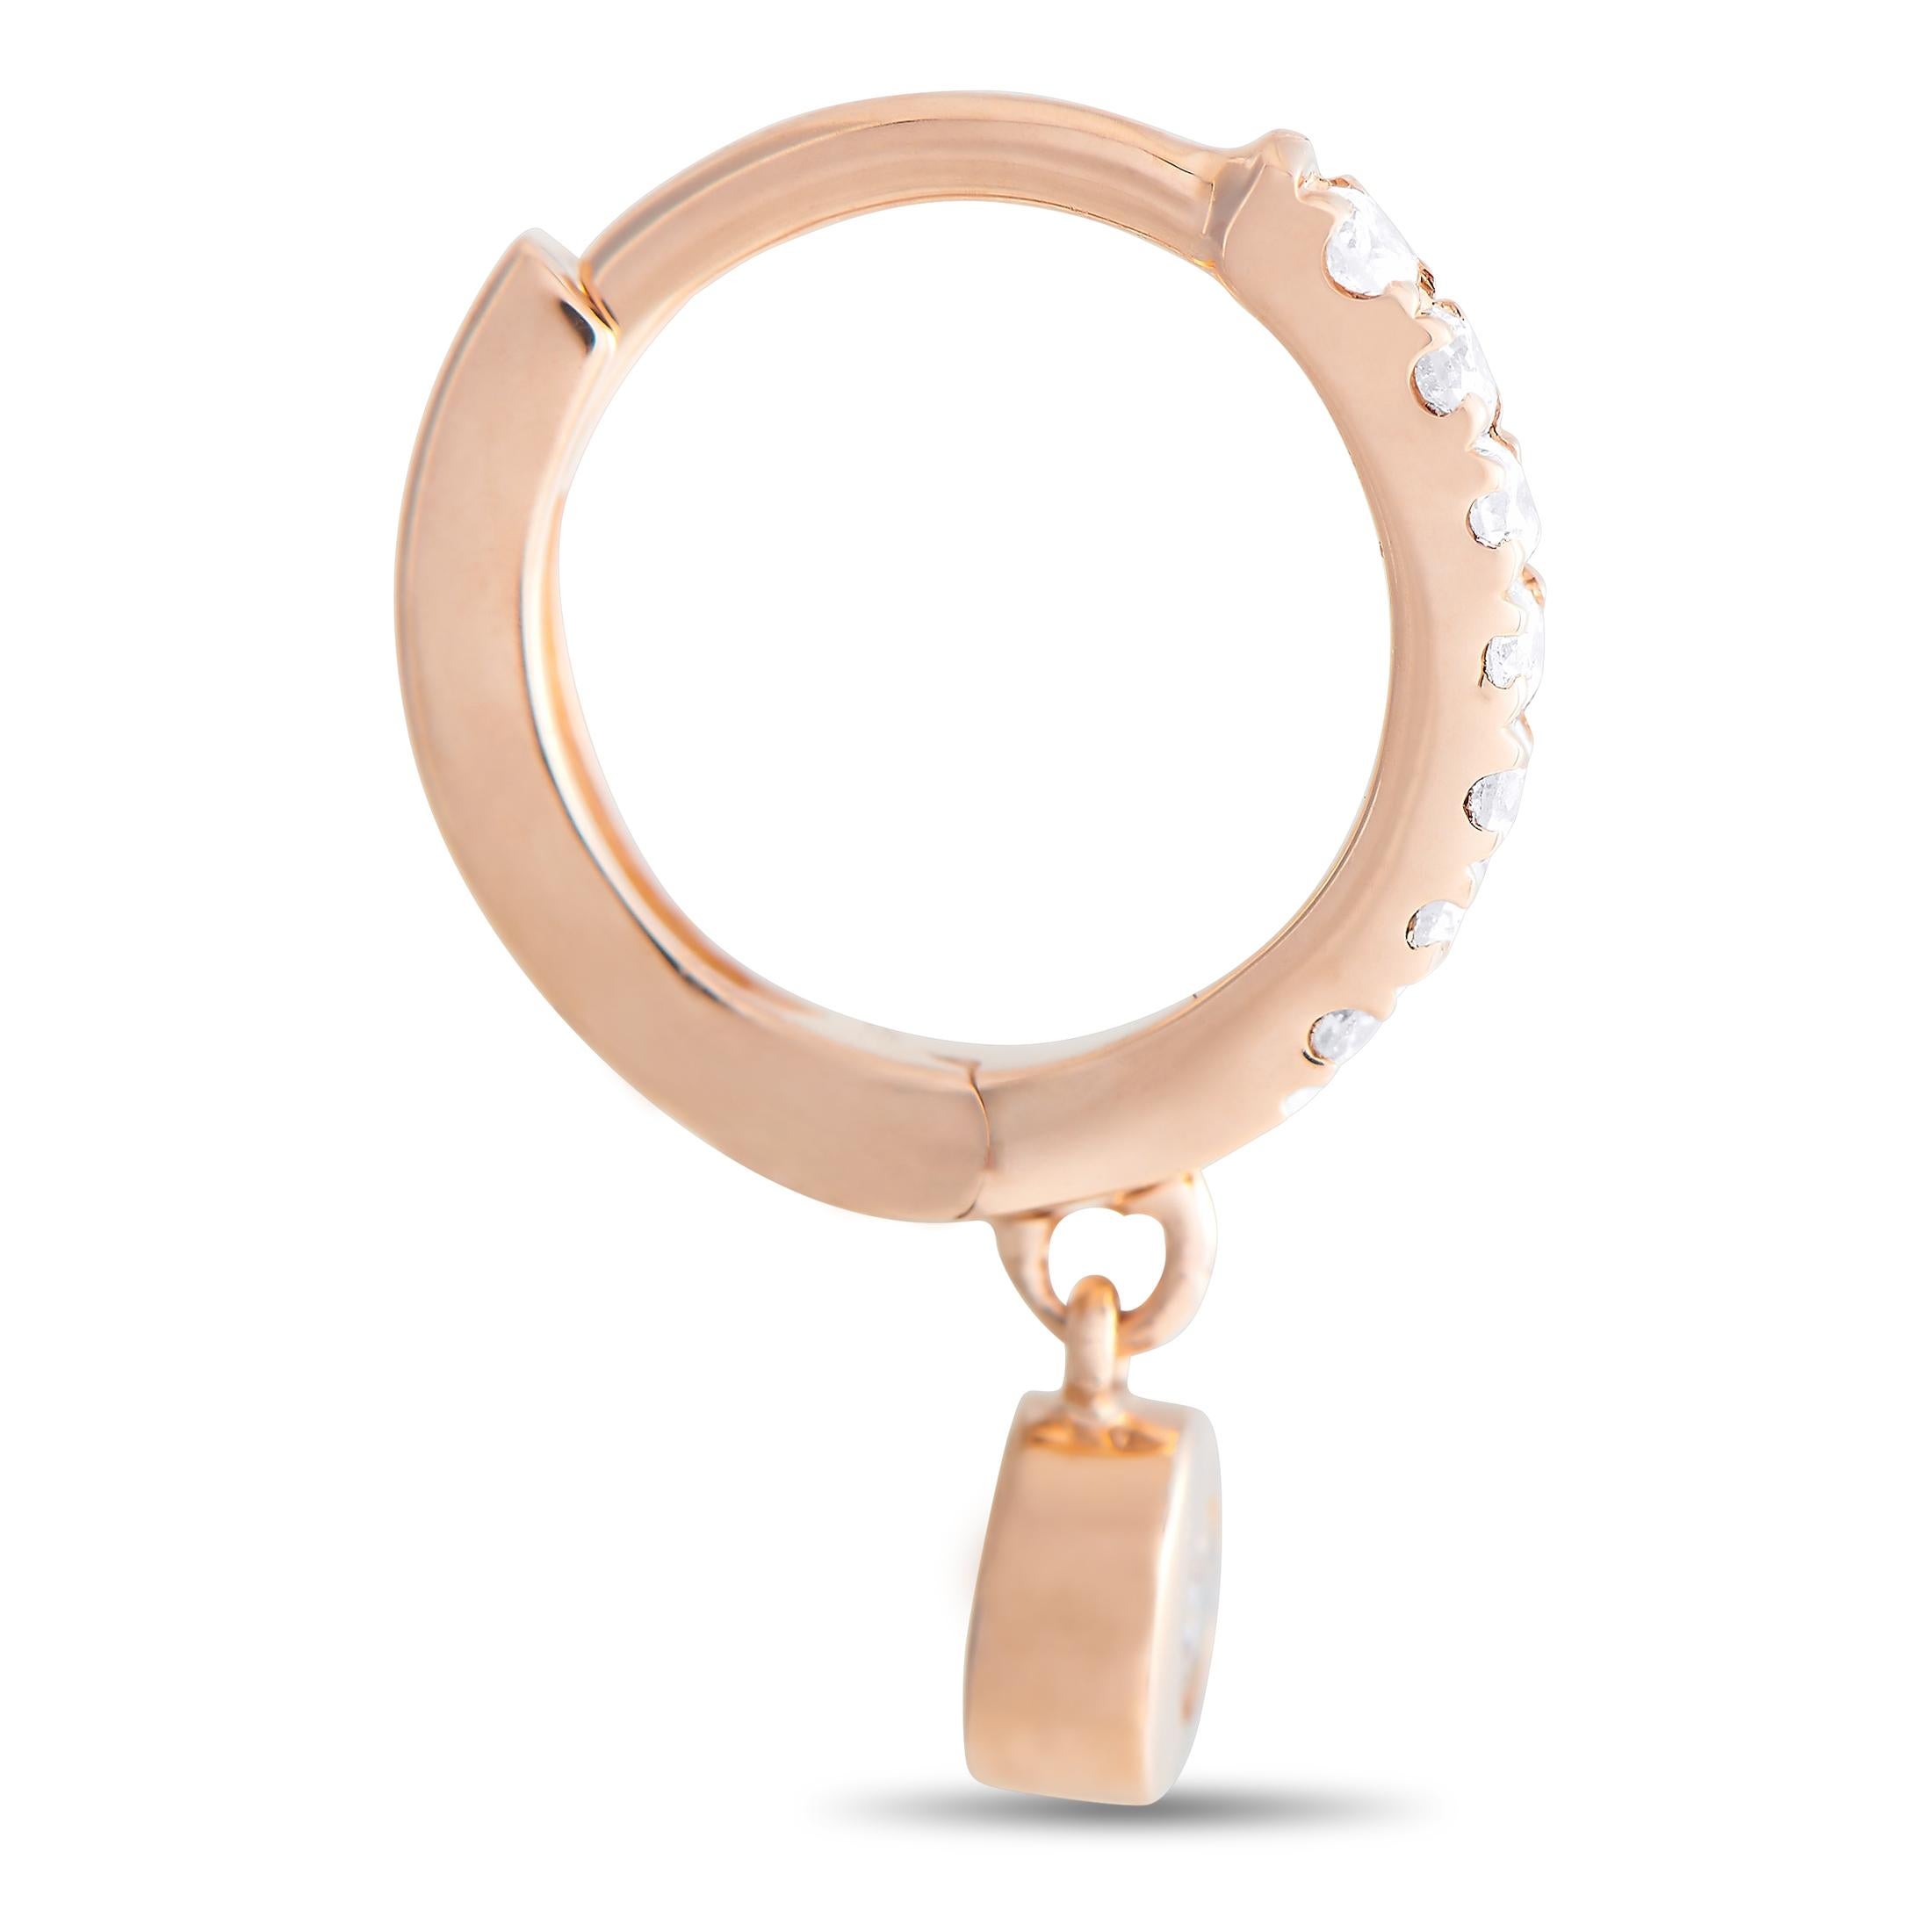 These LB Exclusive earrings are crafted from 14K rose gold and each of the two weighs 0.55 grams. They measure 0.50” in length and 0.15” in width. The pair is set with diamonds that total 0.15 carats.
 
 The earrings are offered in brand new